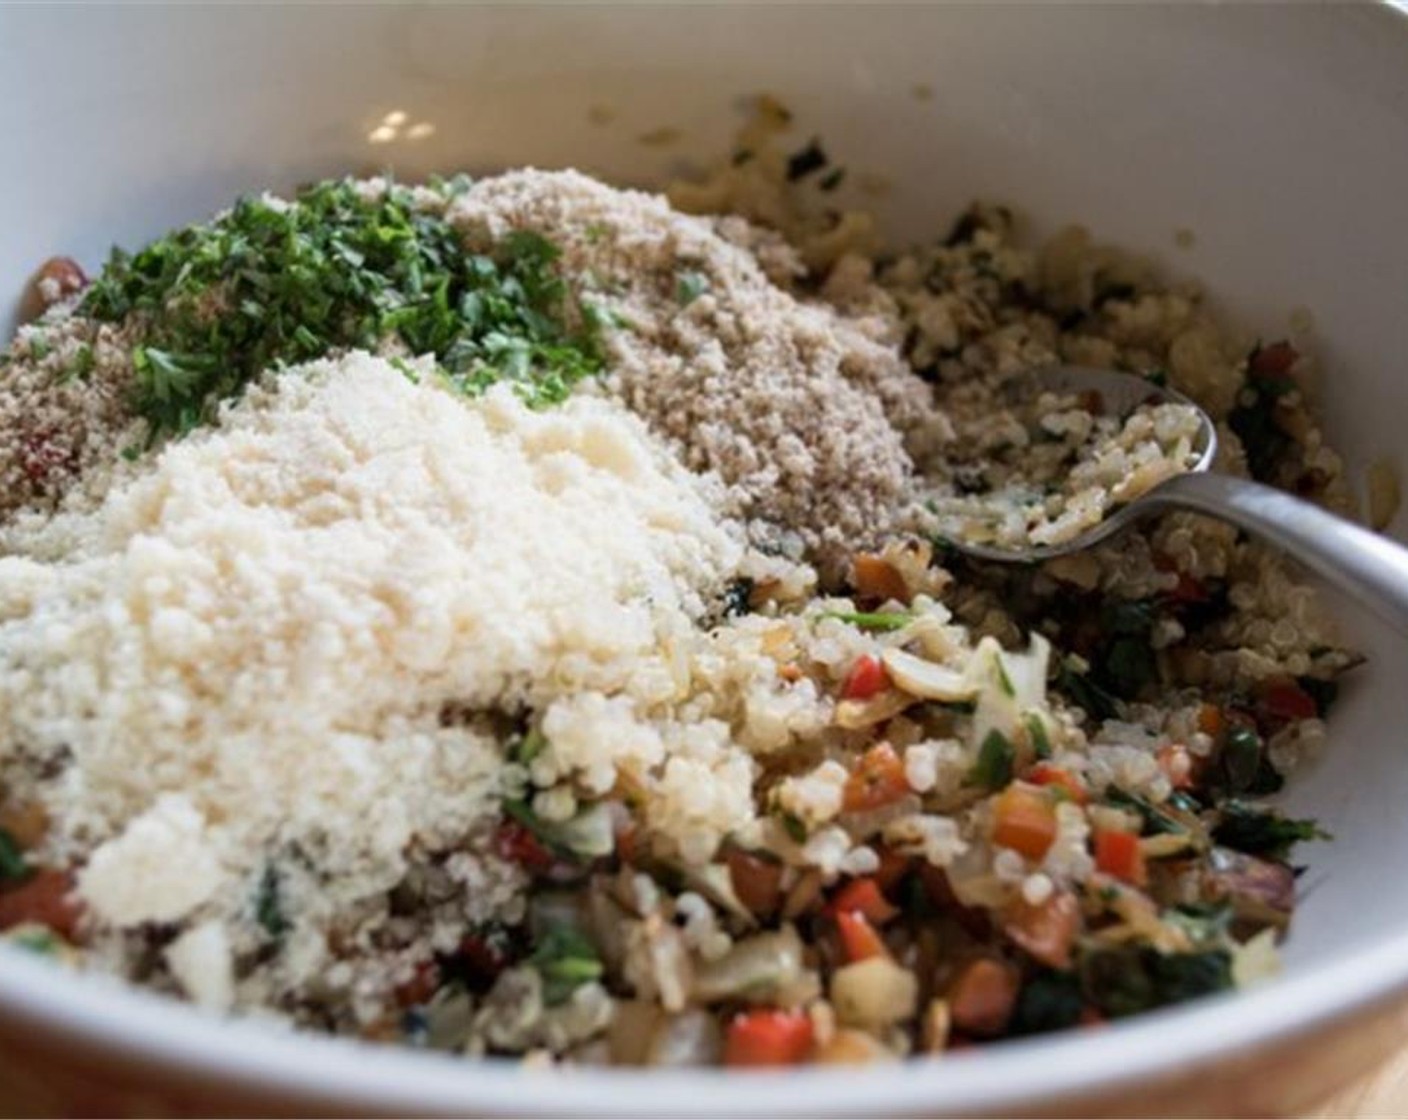 step 5 Add cooked quinoa to a large mixing bowl. Add in sautéed veggies and gently stir. In small bowl, mix Almond Meal (1/2 cup), McCormick® Garlic Powder (1/2 tsp), Onion Powder (1/2 tsp) and Dried Oregano (1/2 tsp).